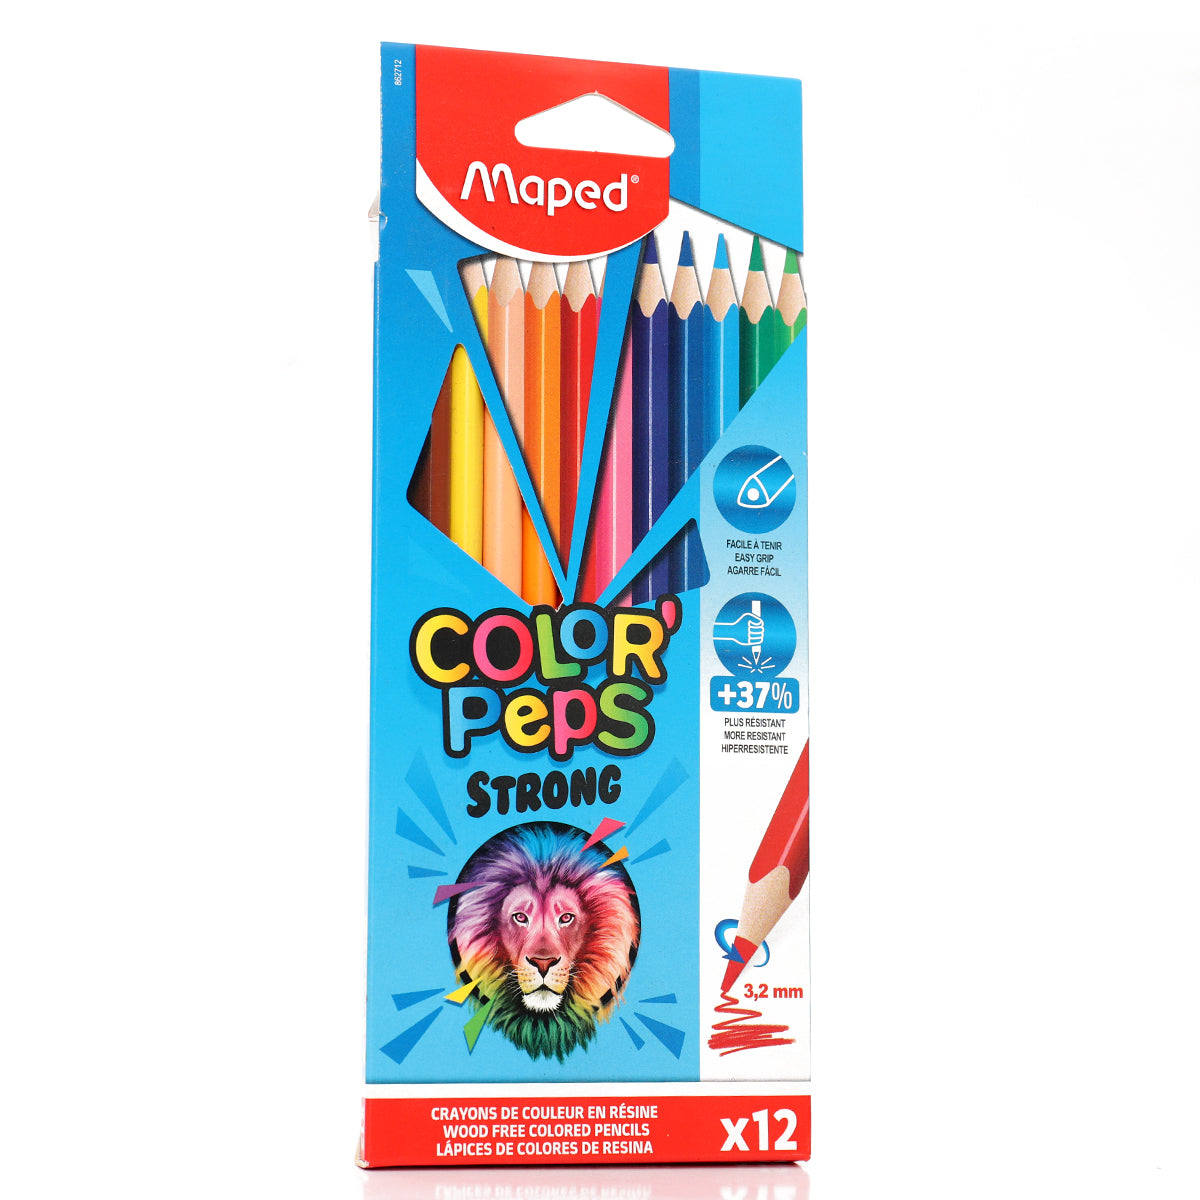 Maped Color'Peps Strong Coloured Pencils X 12 (7686160449760)